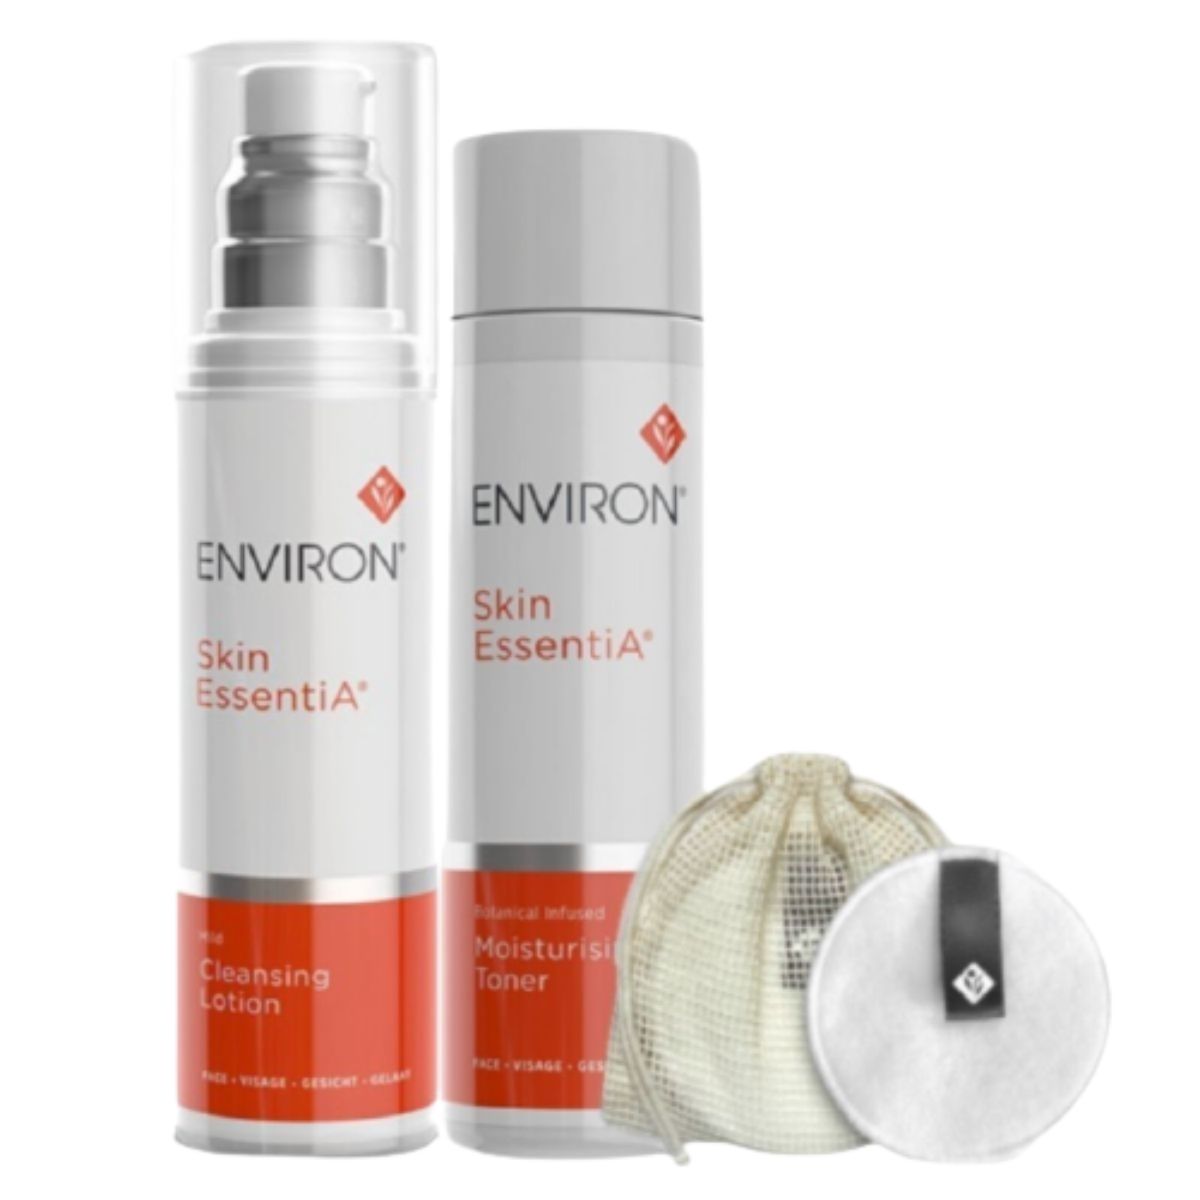 Environ Cleansing Lotion and Moisturising Toner with Complimentary Reusable Cotton Pad